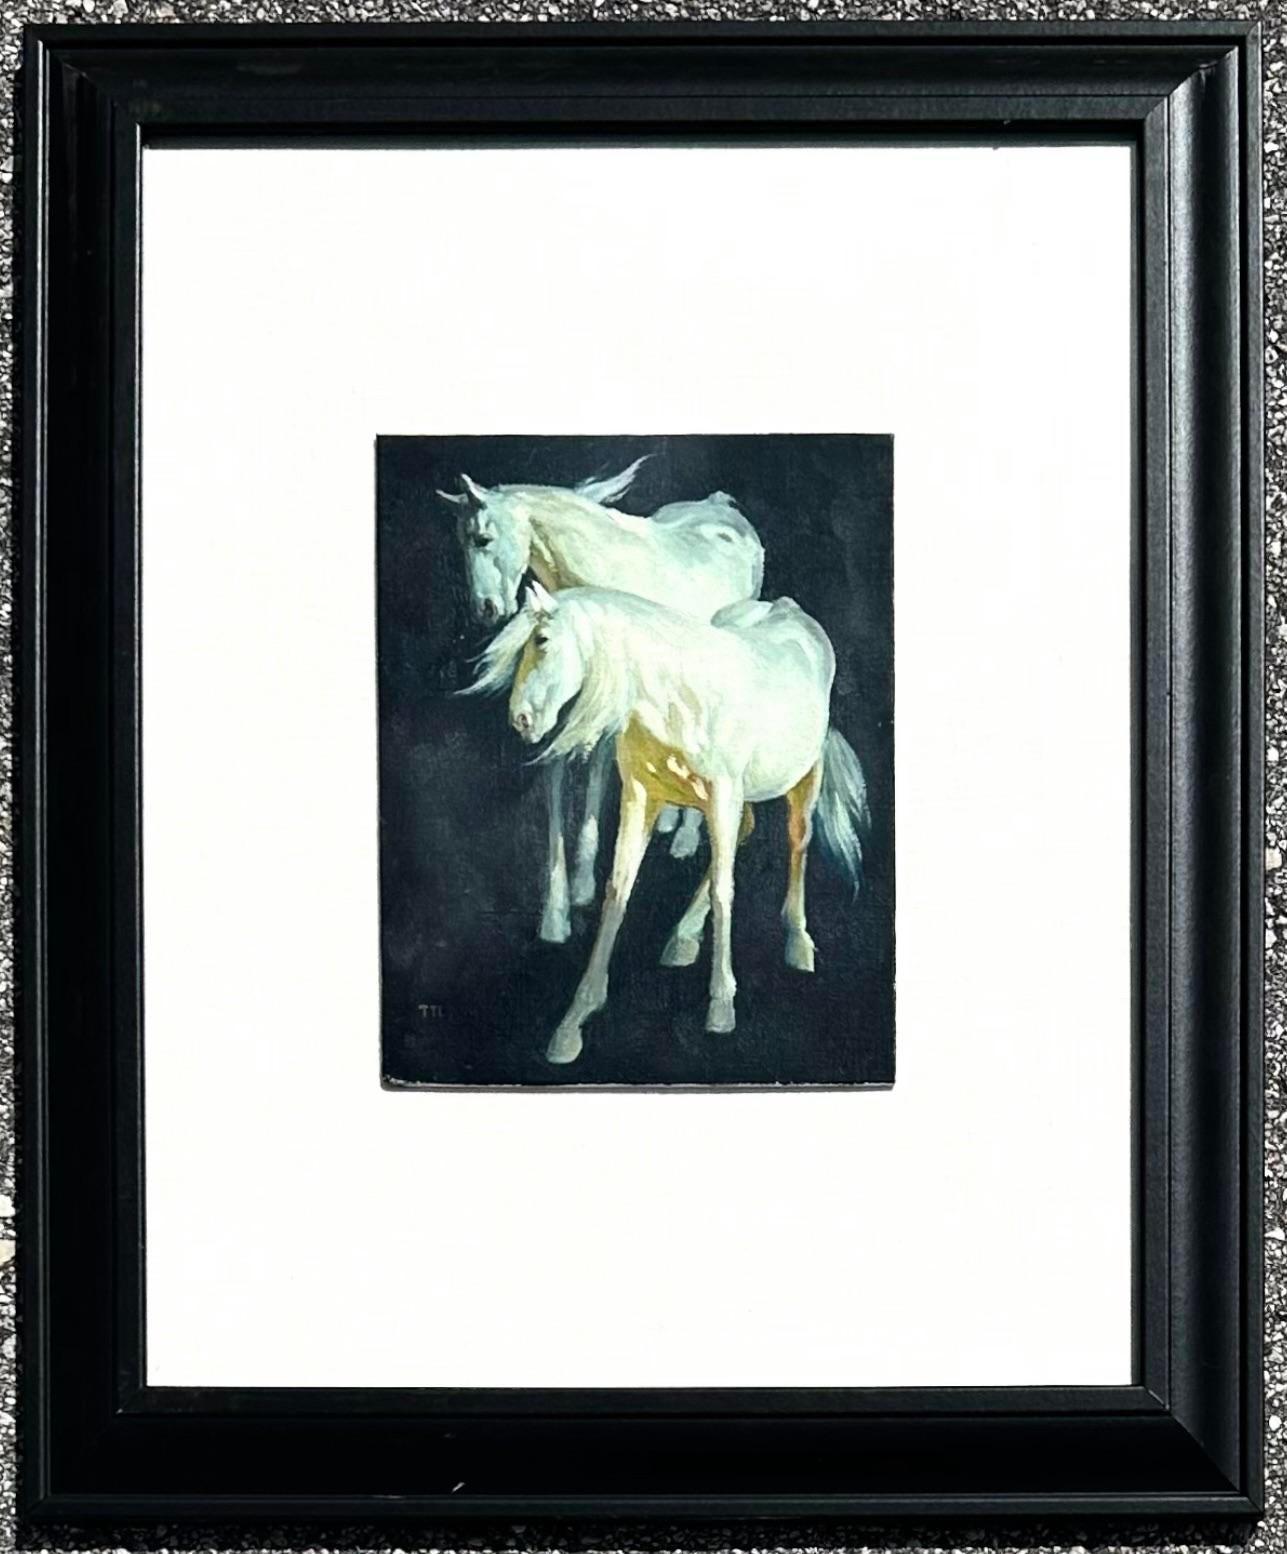 This unique painting depicts 2 horses with flowing hair one standing in front of the other. The majestic white fur contrasts gracefully with the dark black background and the artist portrays a shadow with a dark yellow coloration on the underside of